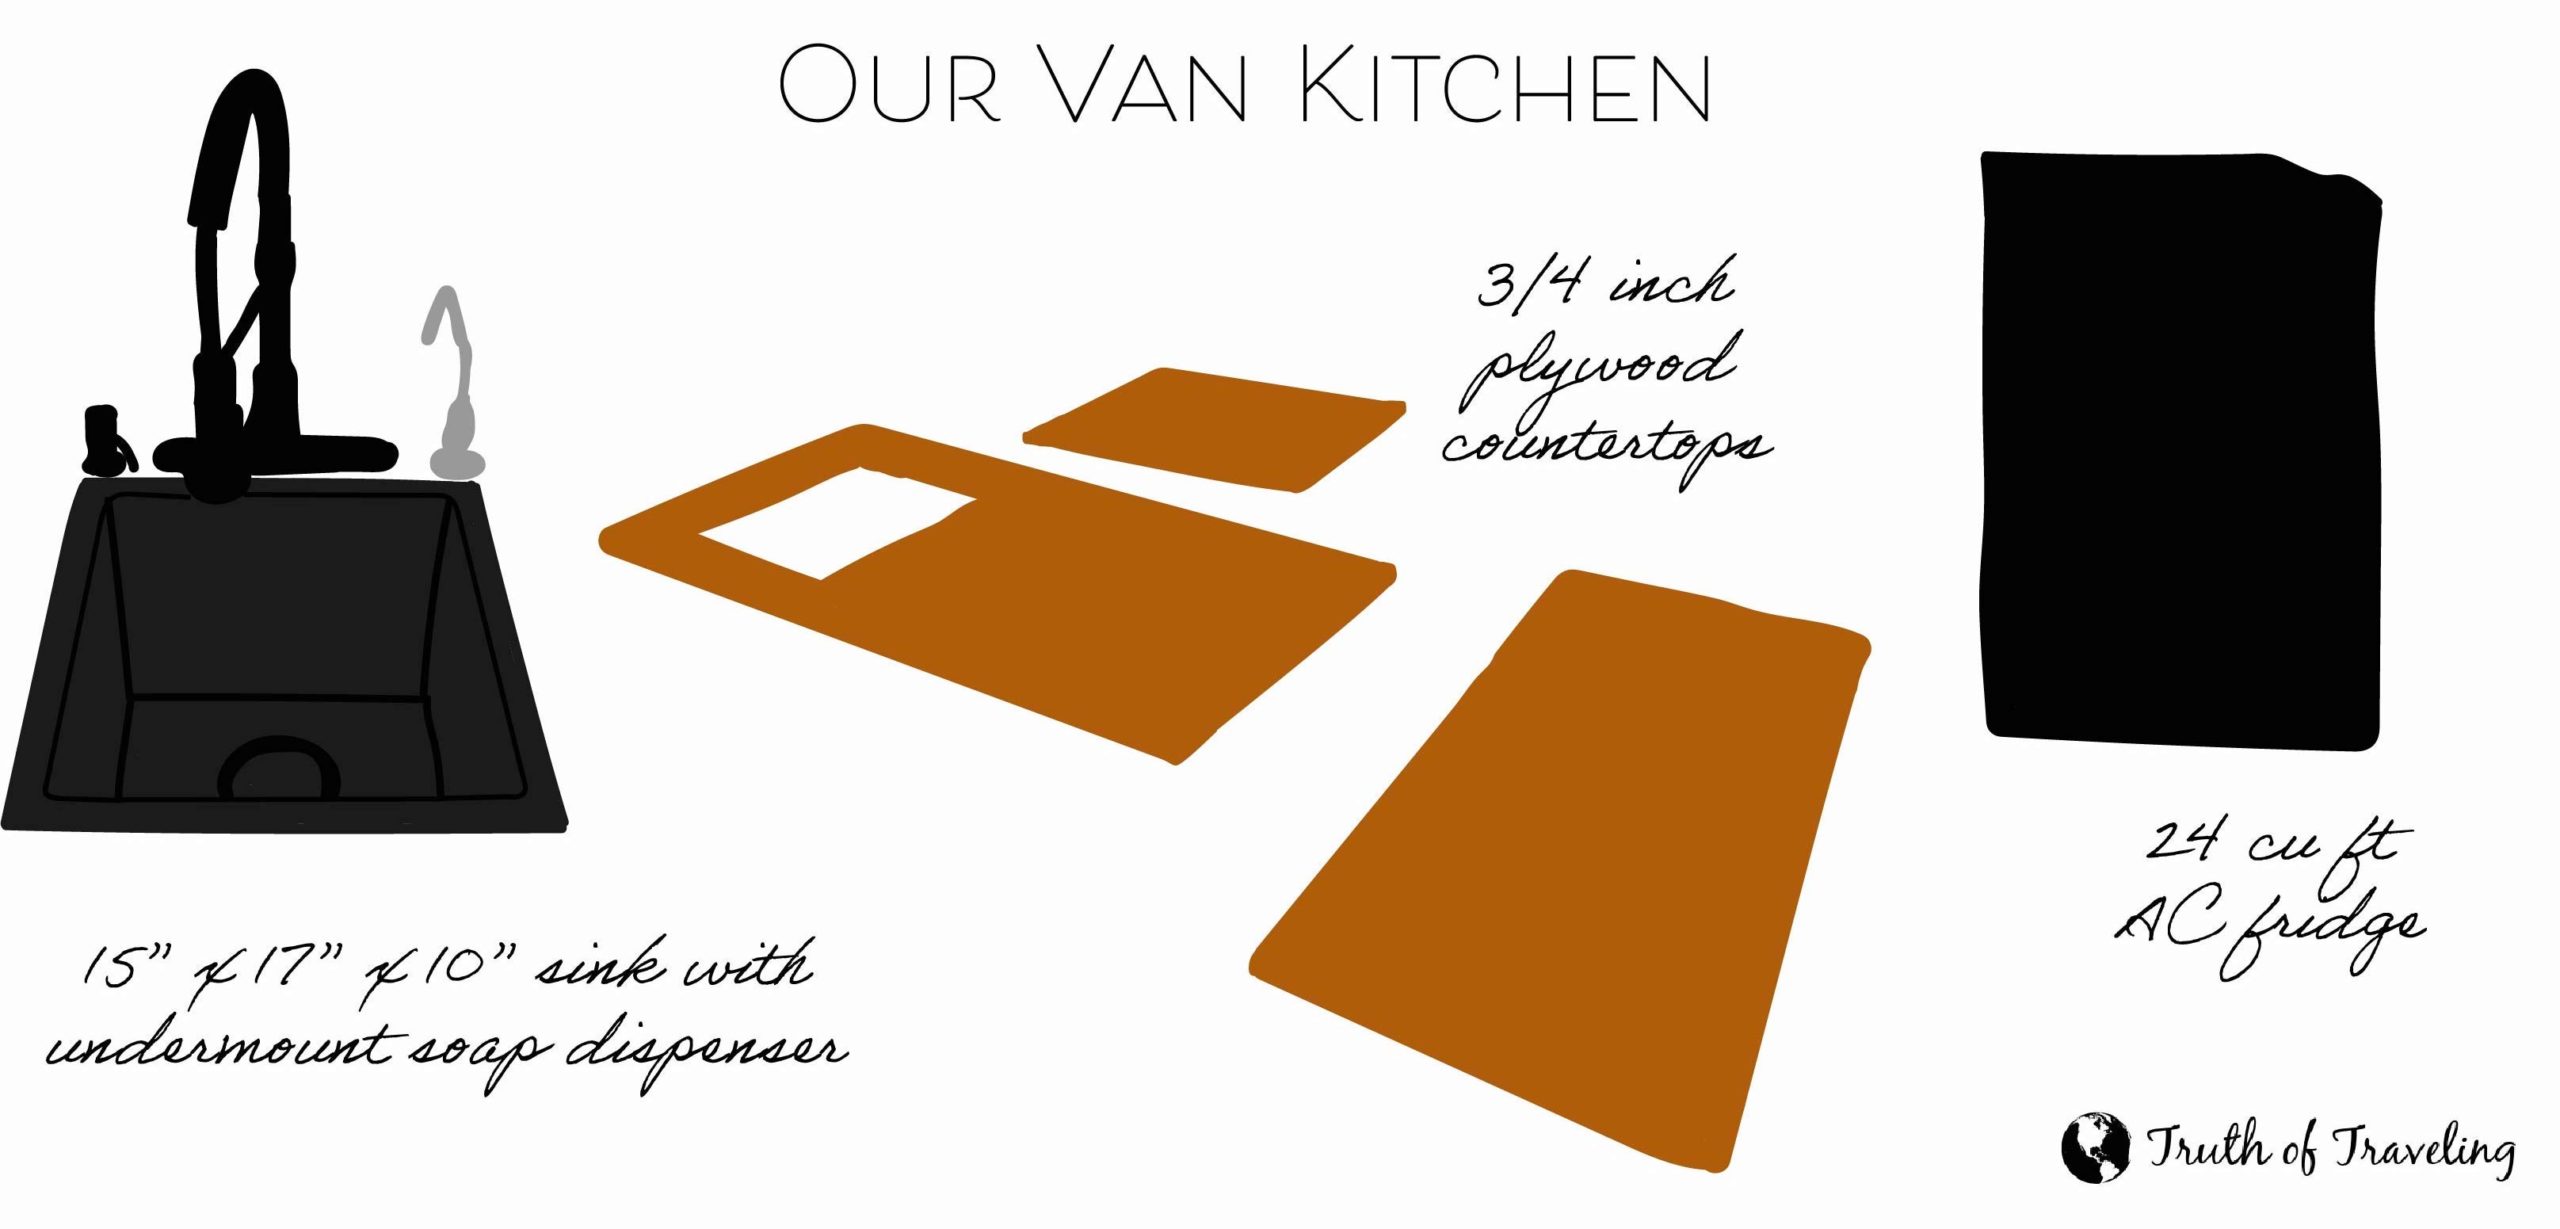 Our van kitchen- 15" x 17" x 10" sink, 3/4 inch plywood countertops, and 24 cu ft AC fridge